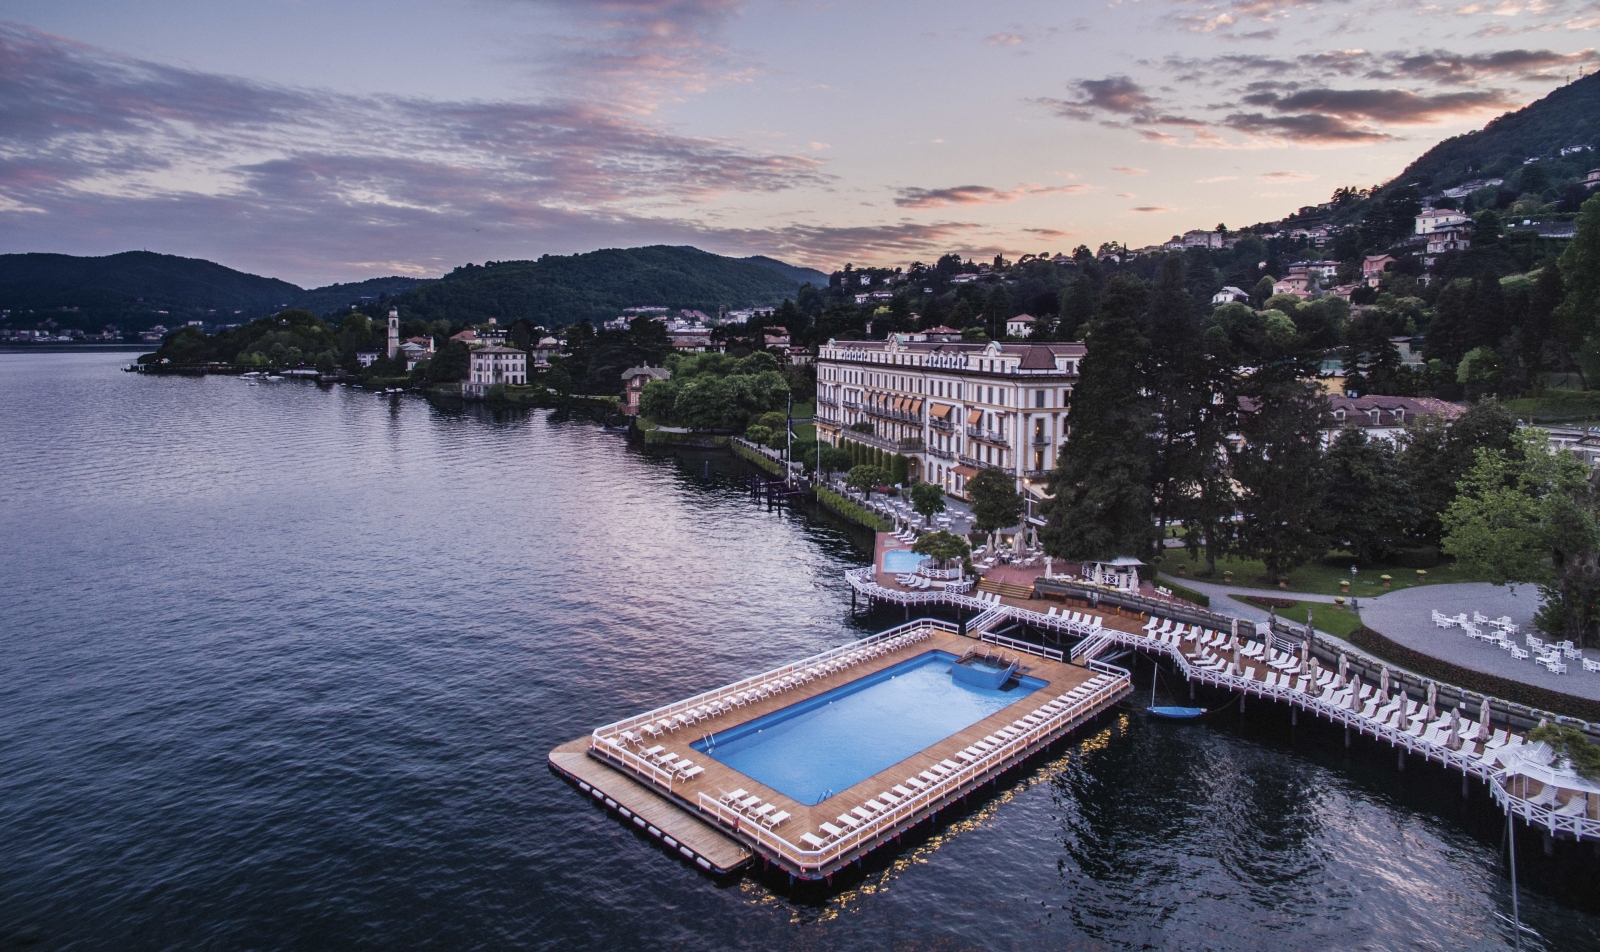 Aerial view of the floating pool at sundown at Villa D'Este on Lake Como Italy